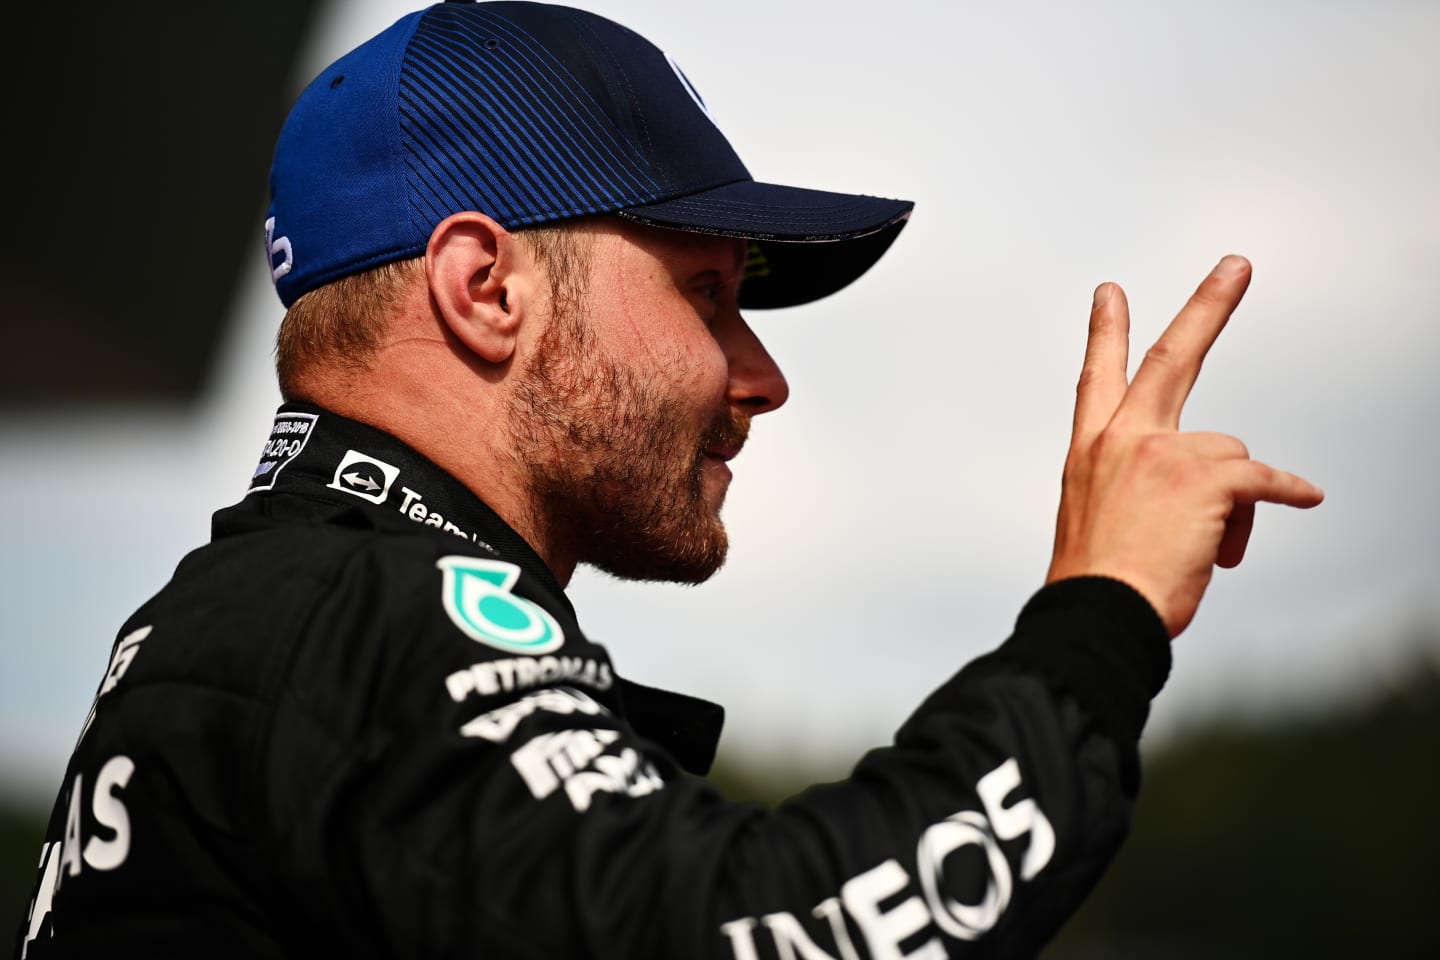 SPIELBERG, AUSTRIA - JULY 04: Second placed Valtteri Bottas of Finland and Mercedes GP celebrates in parc ferme during the F1 Grand Prix of Austria at Red Bull Ring on July 04, 2021 in Spielberg, Austria. (Photo by Christian Bruna - Pool/Getty Images)